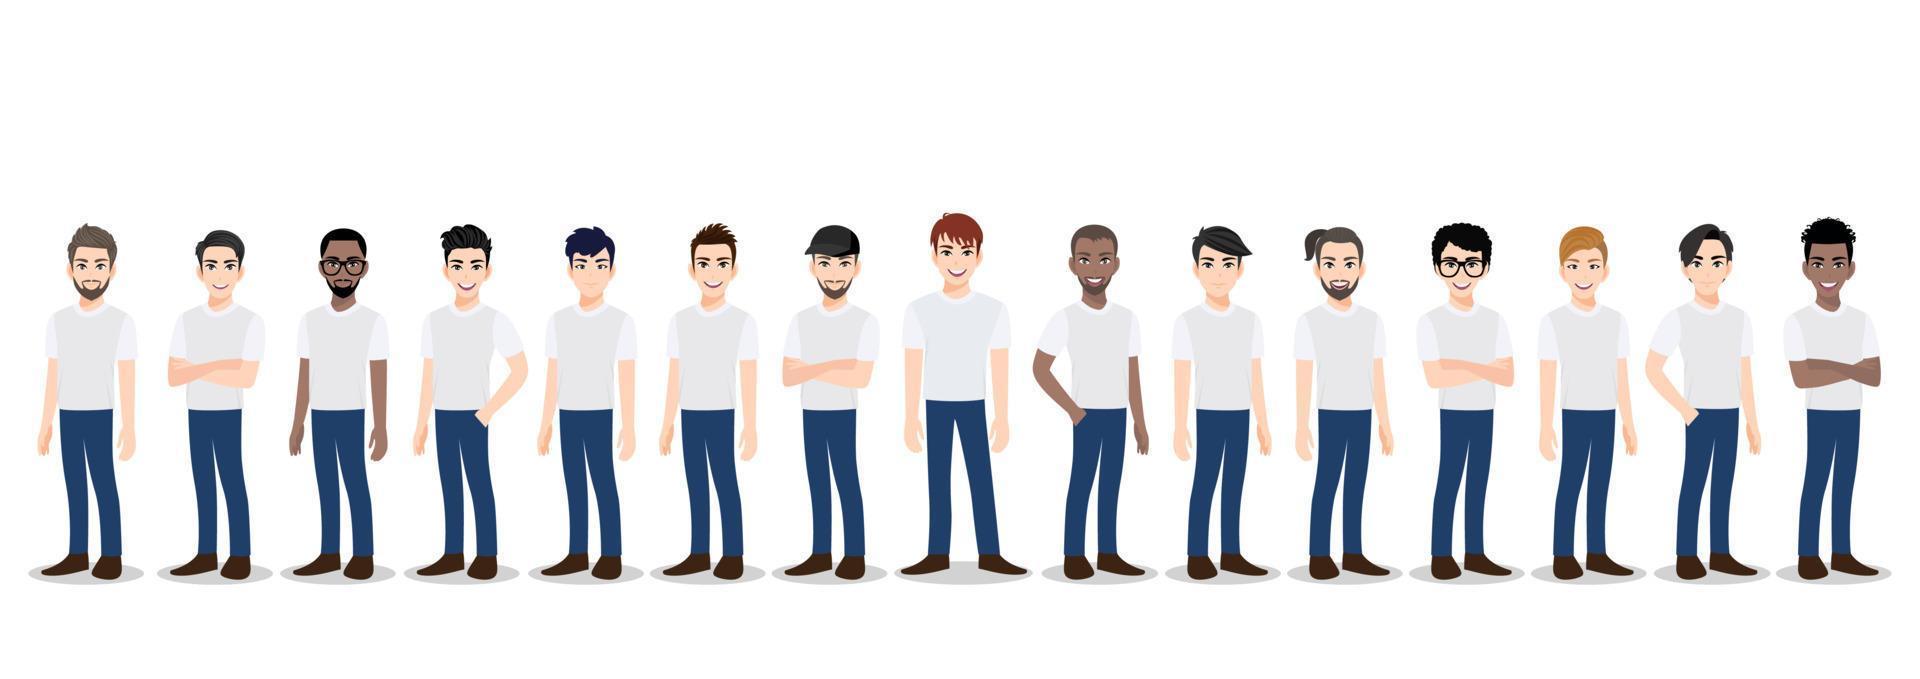 Cartoon character with the men team in T-shirt white and blue jean casual. Teamwork concept flat vector illustration.